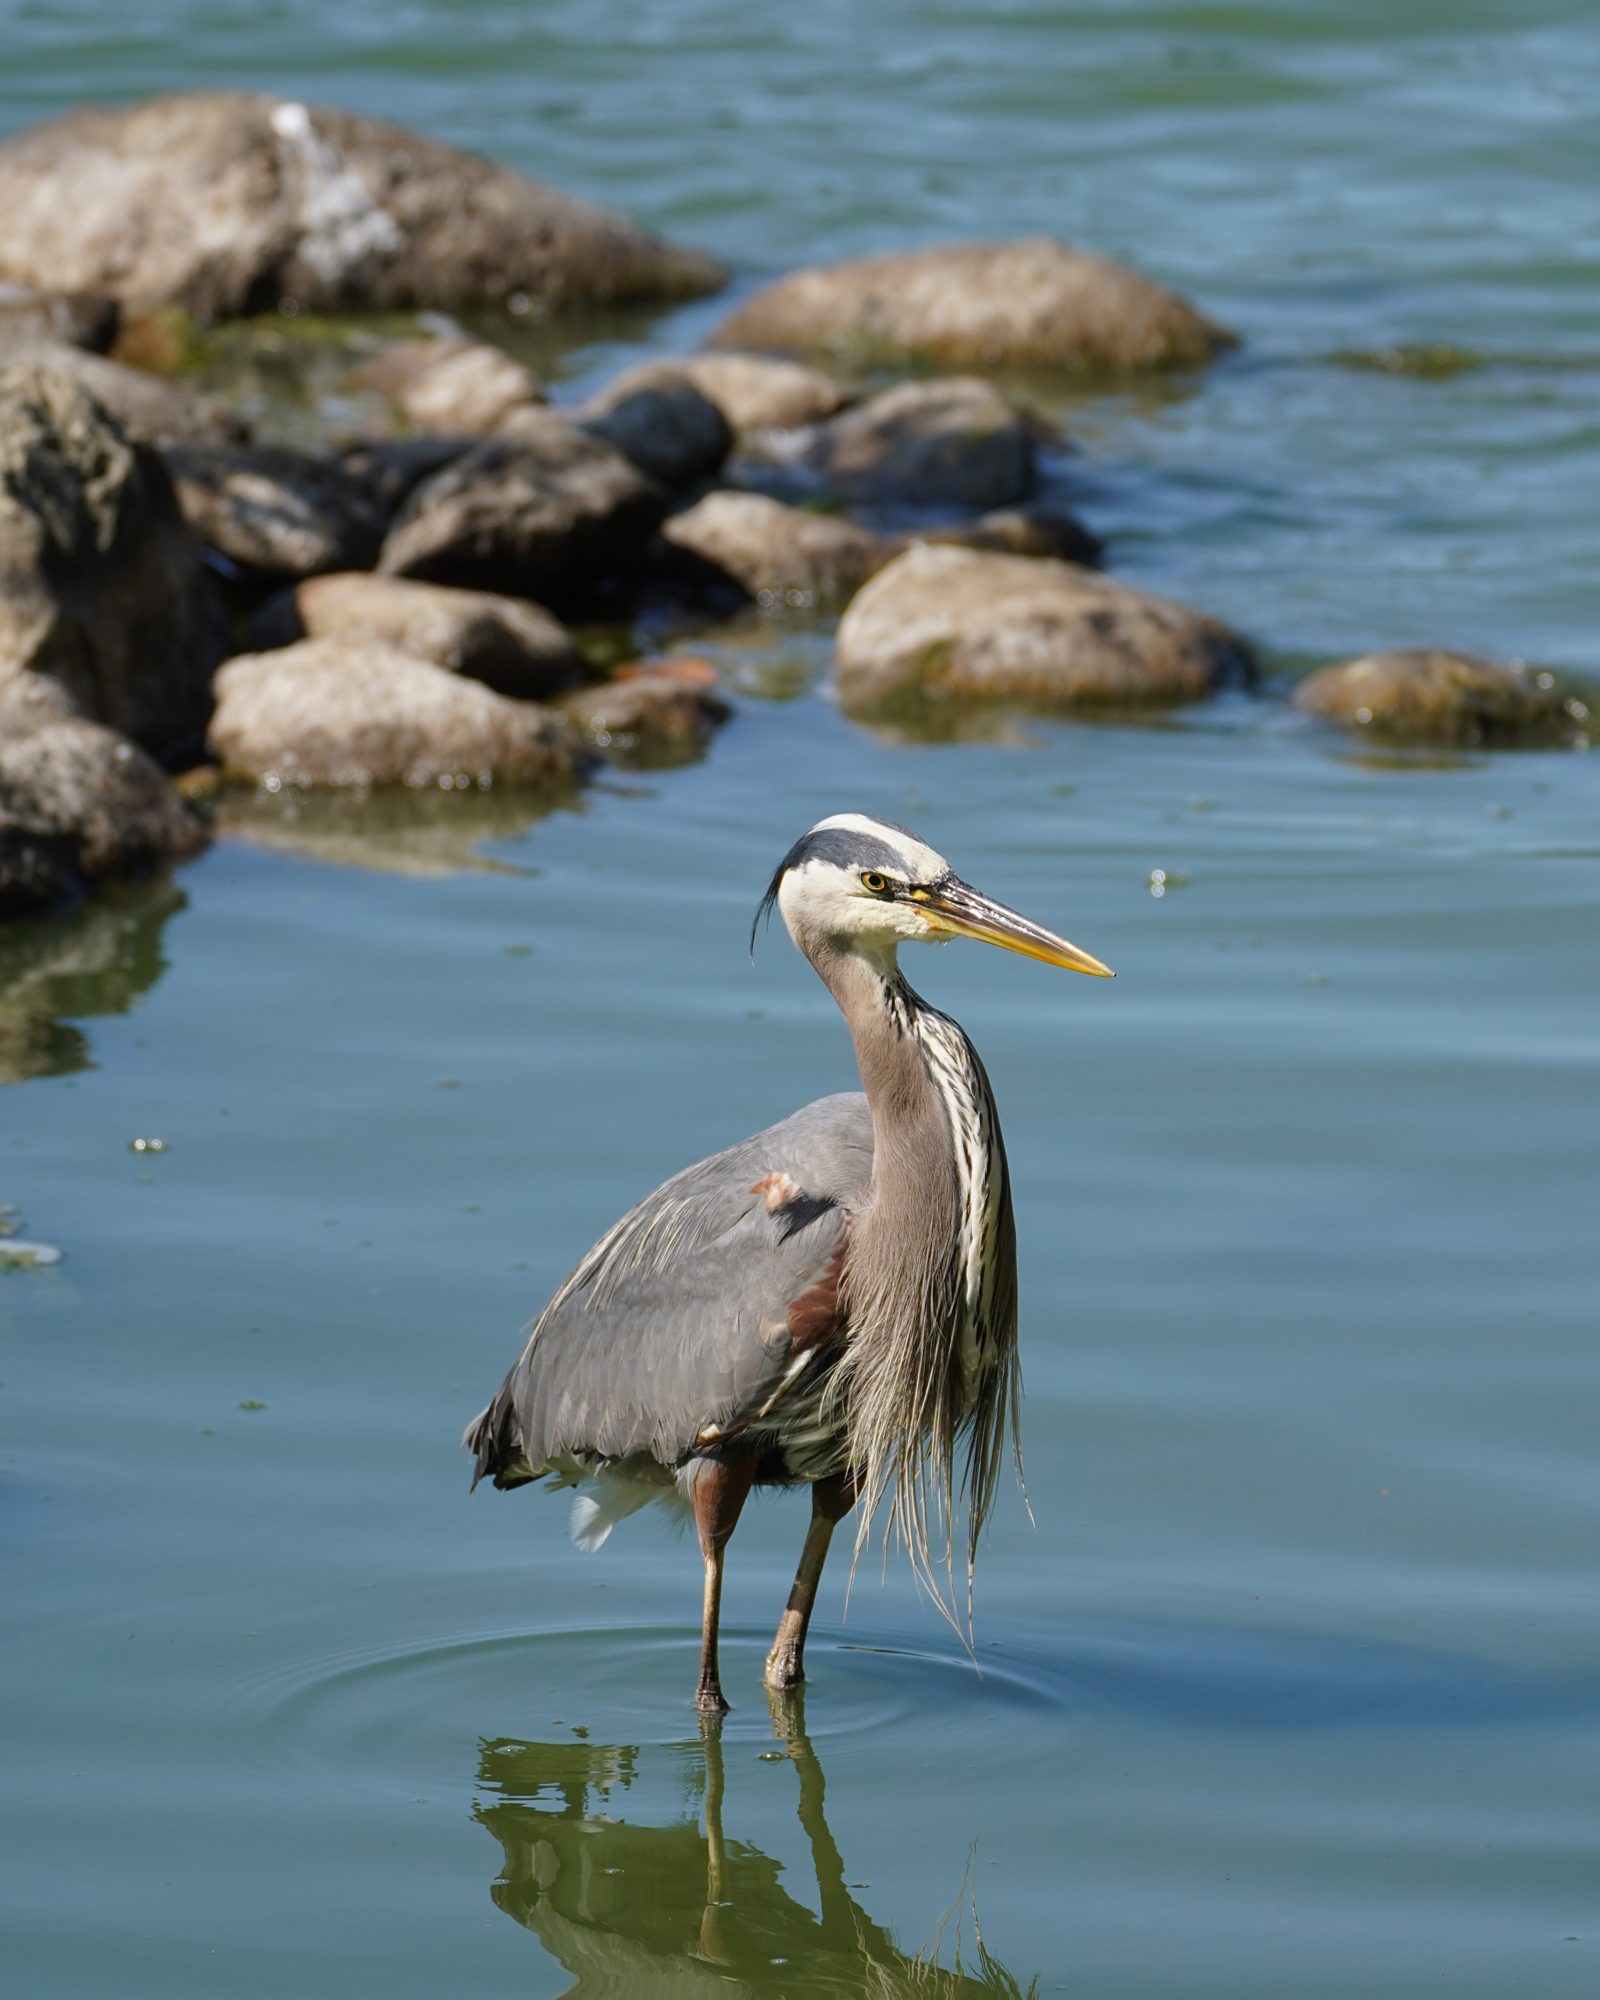 A Great Blue Heron is standing in shallow water, showing off its stringy chest feathers. A small rocky island is in the background